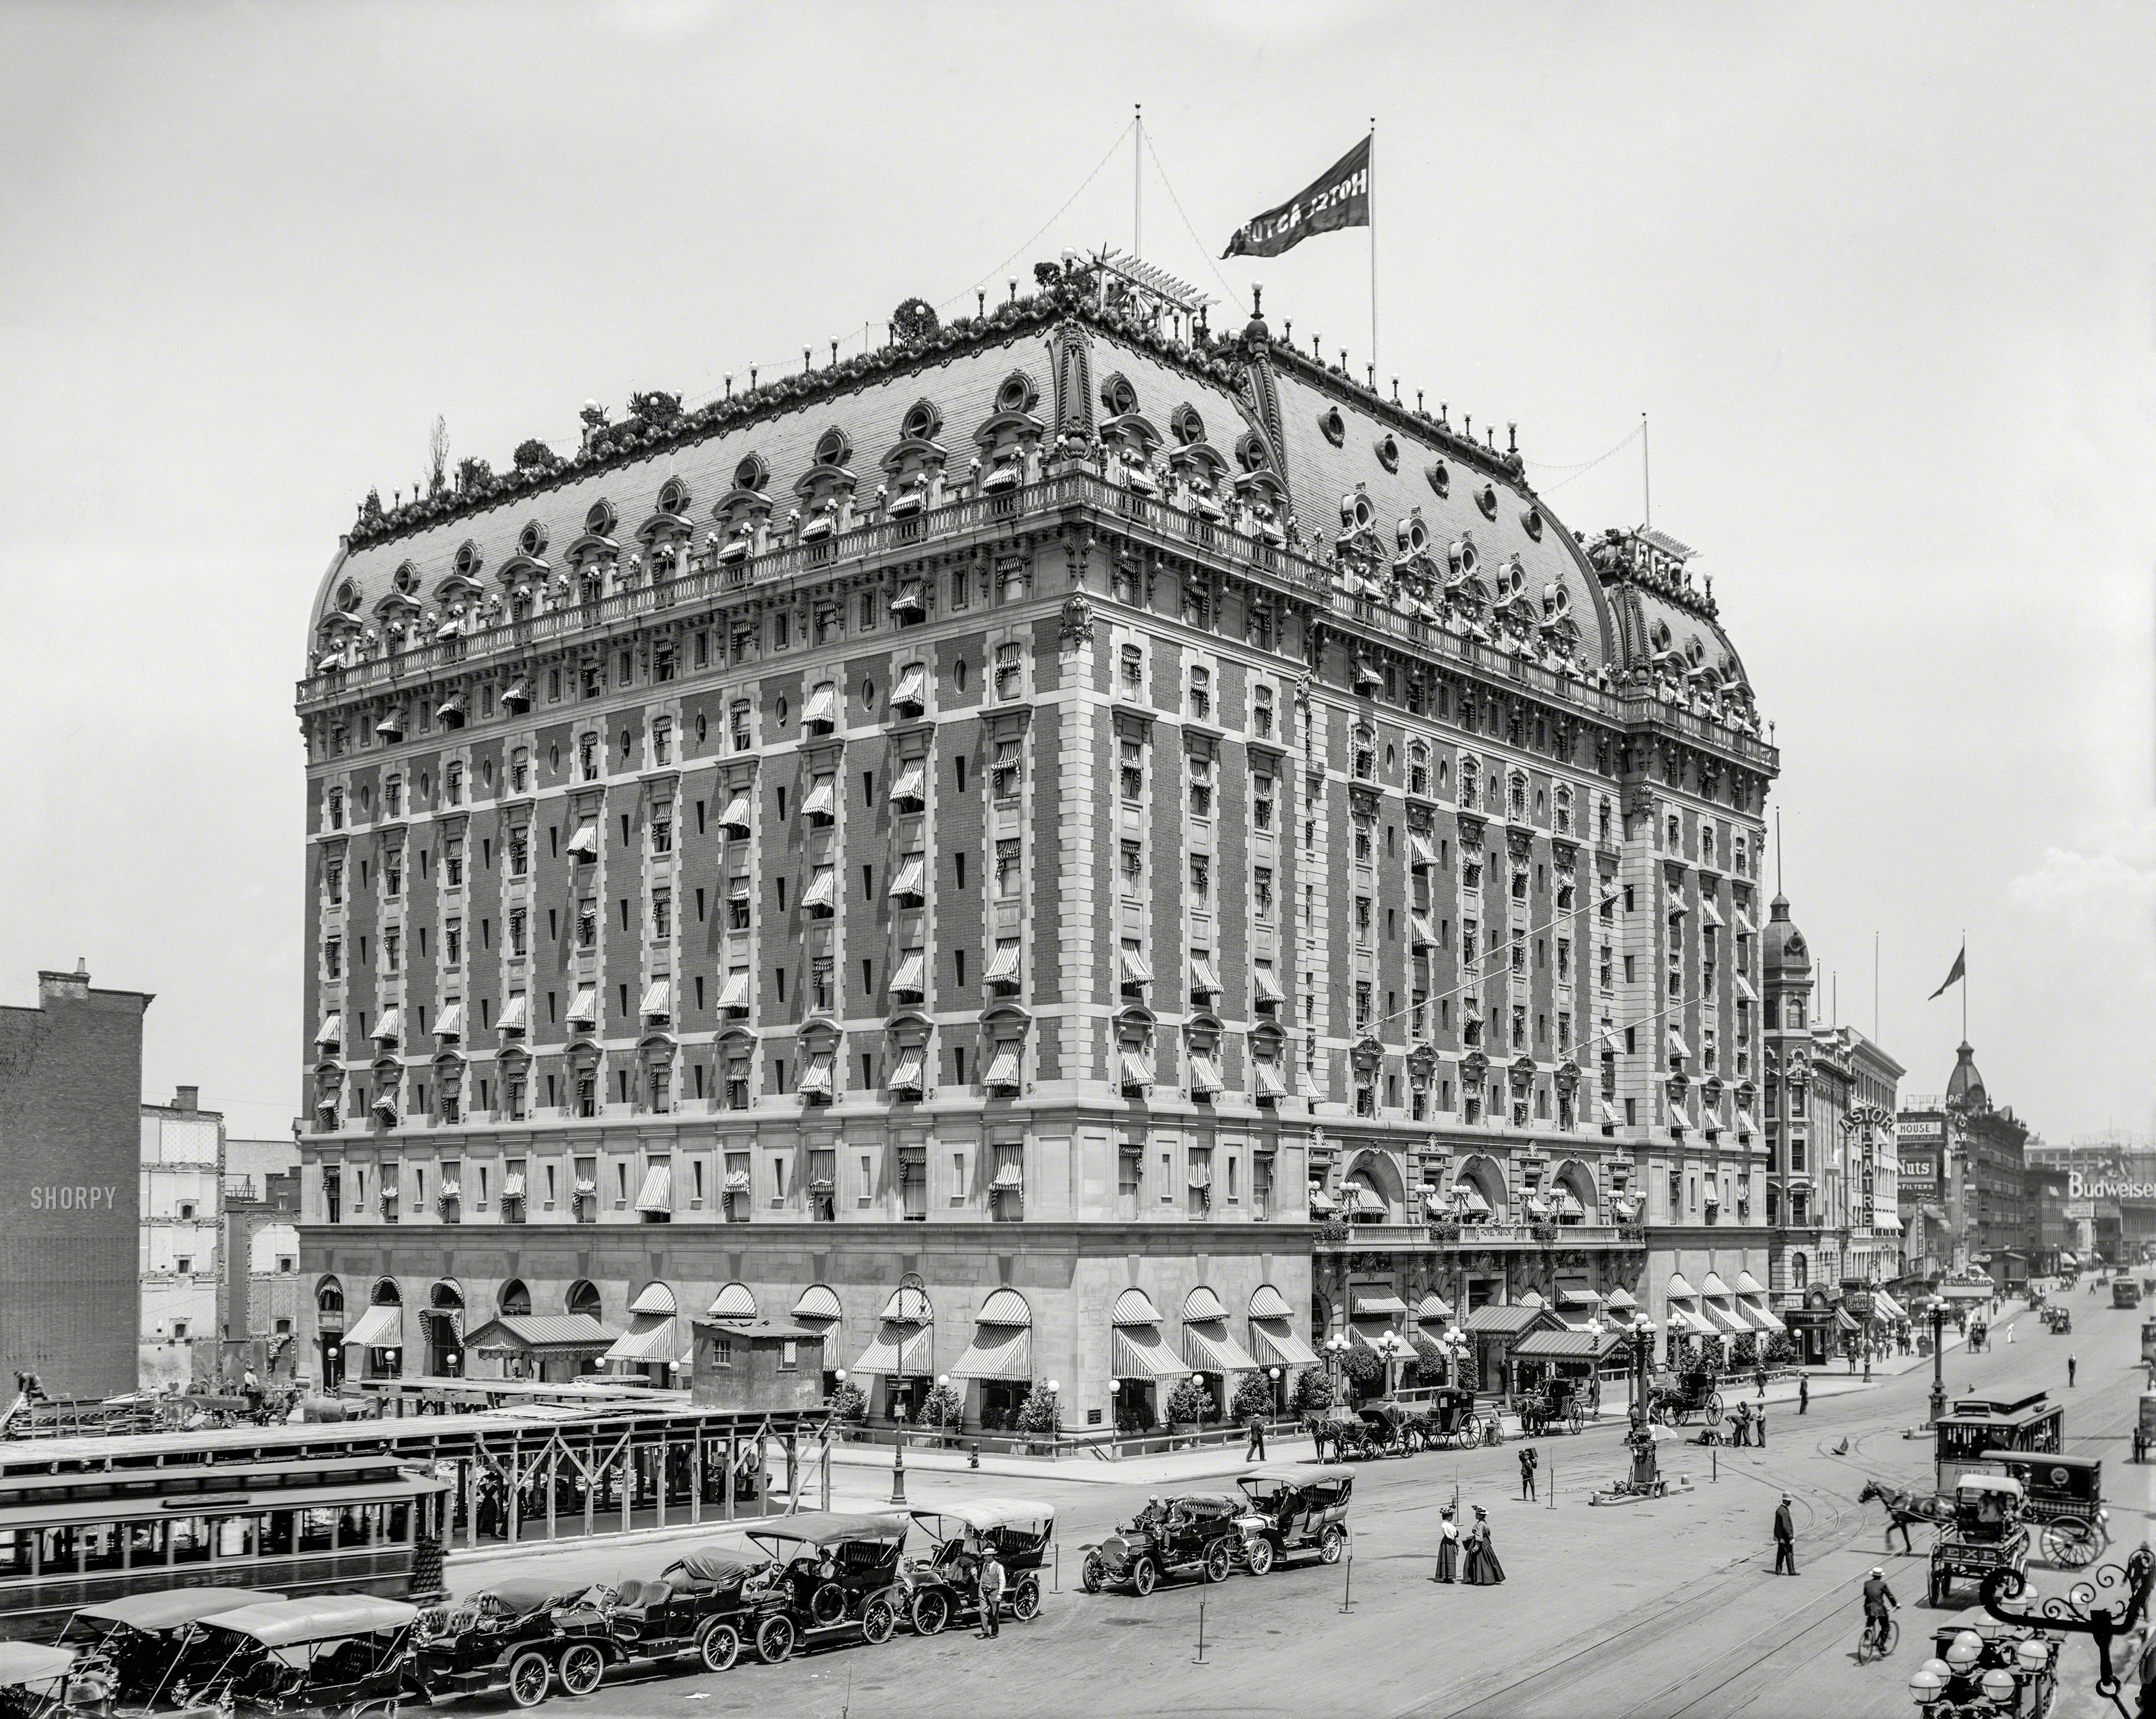 New York in 1908. "Hotel Astor, Times Square." Note the fancy roof garden. 8x10 inch dry plate glass negative, Detroit Publishing Company. View full size.